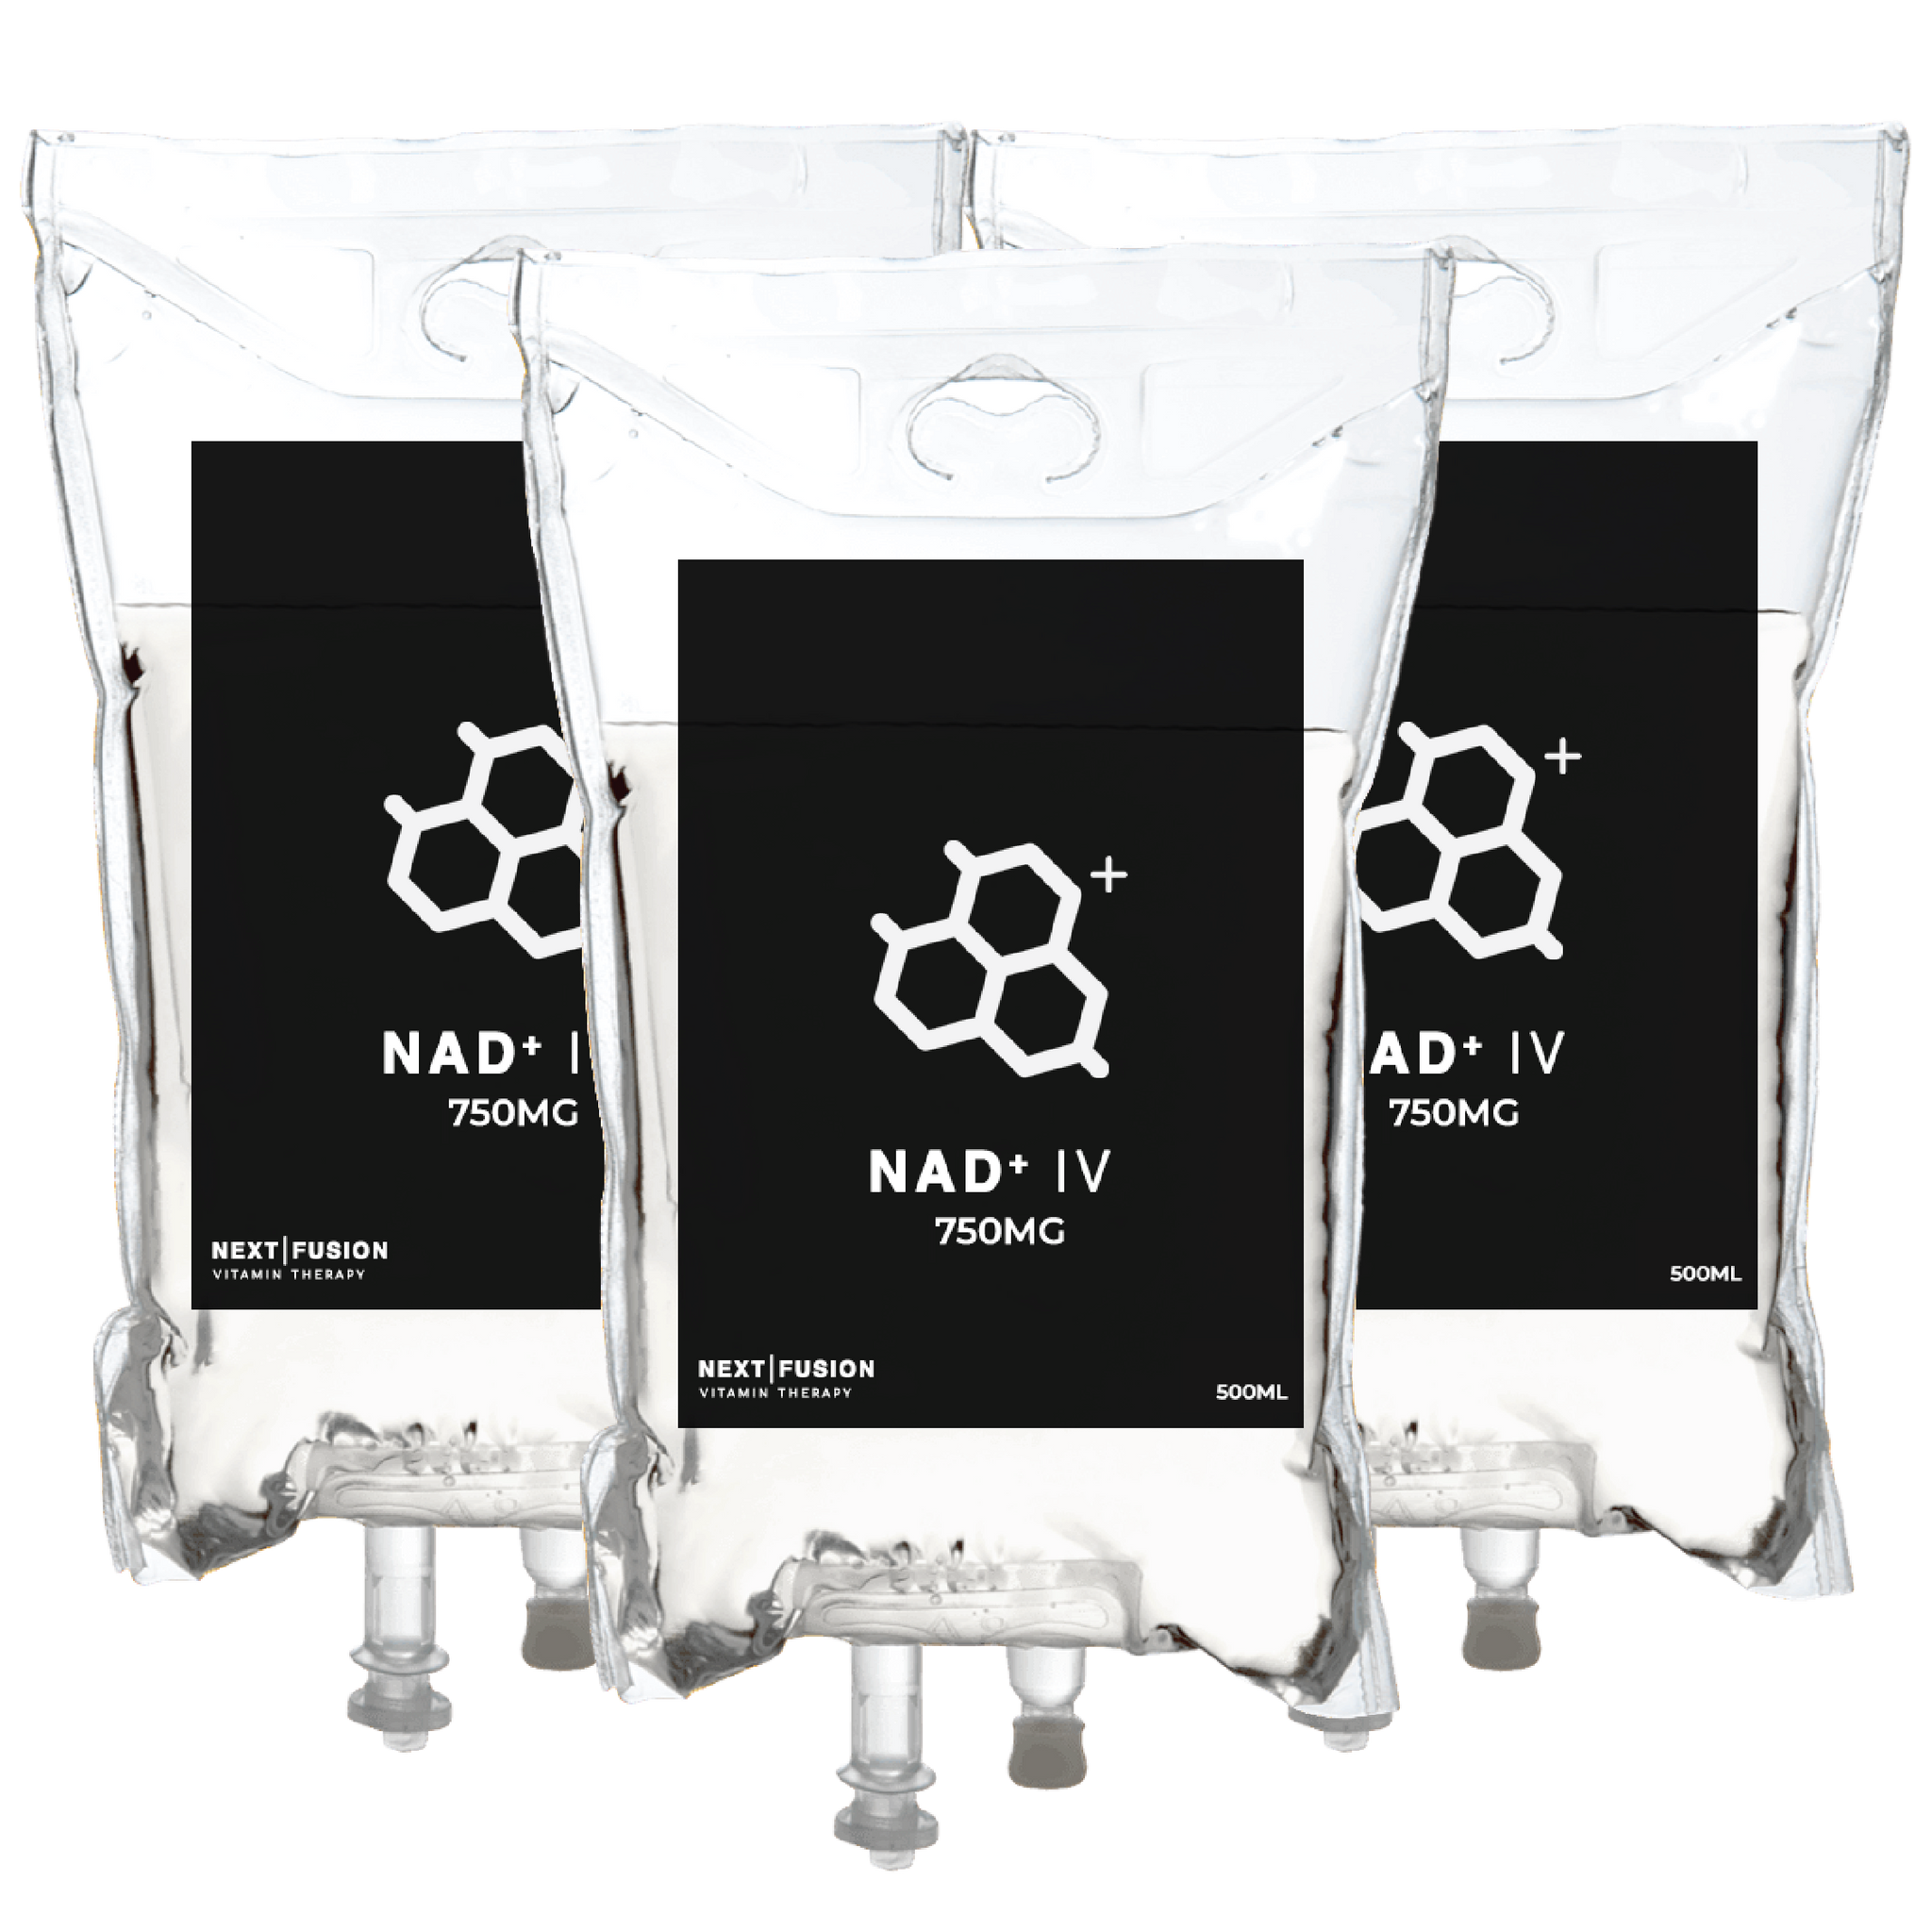 3-Pack of NAD+ IV Therapy 750mg